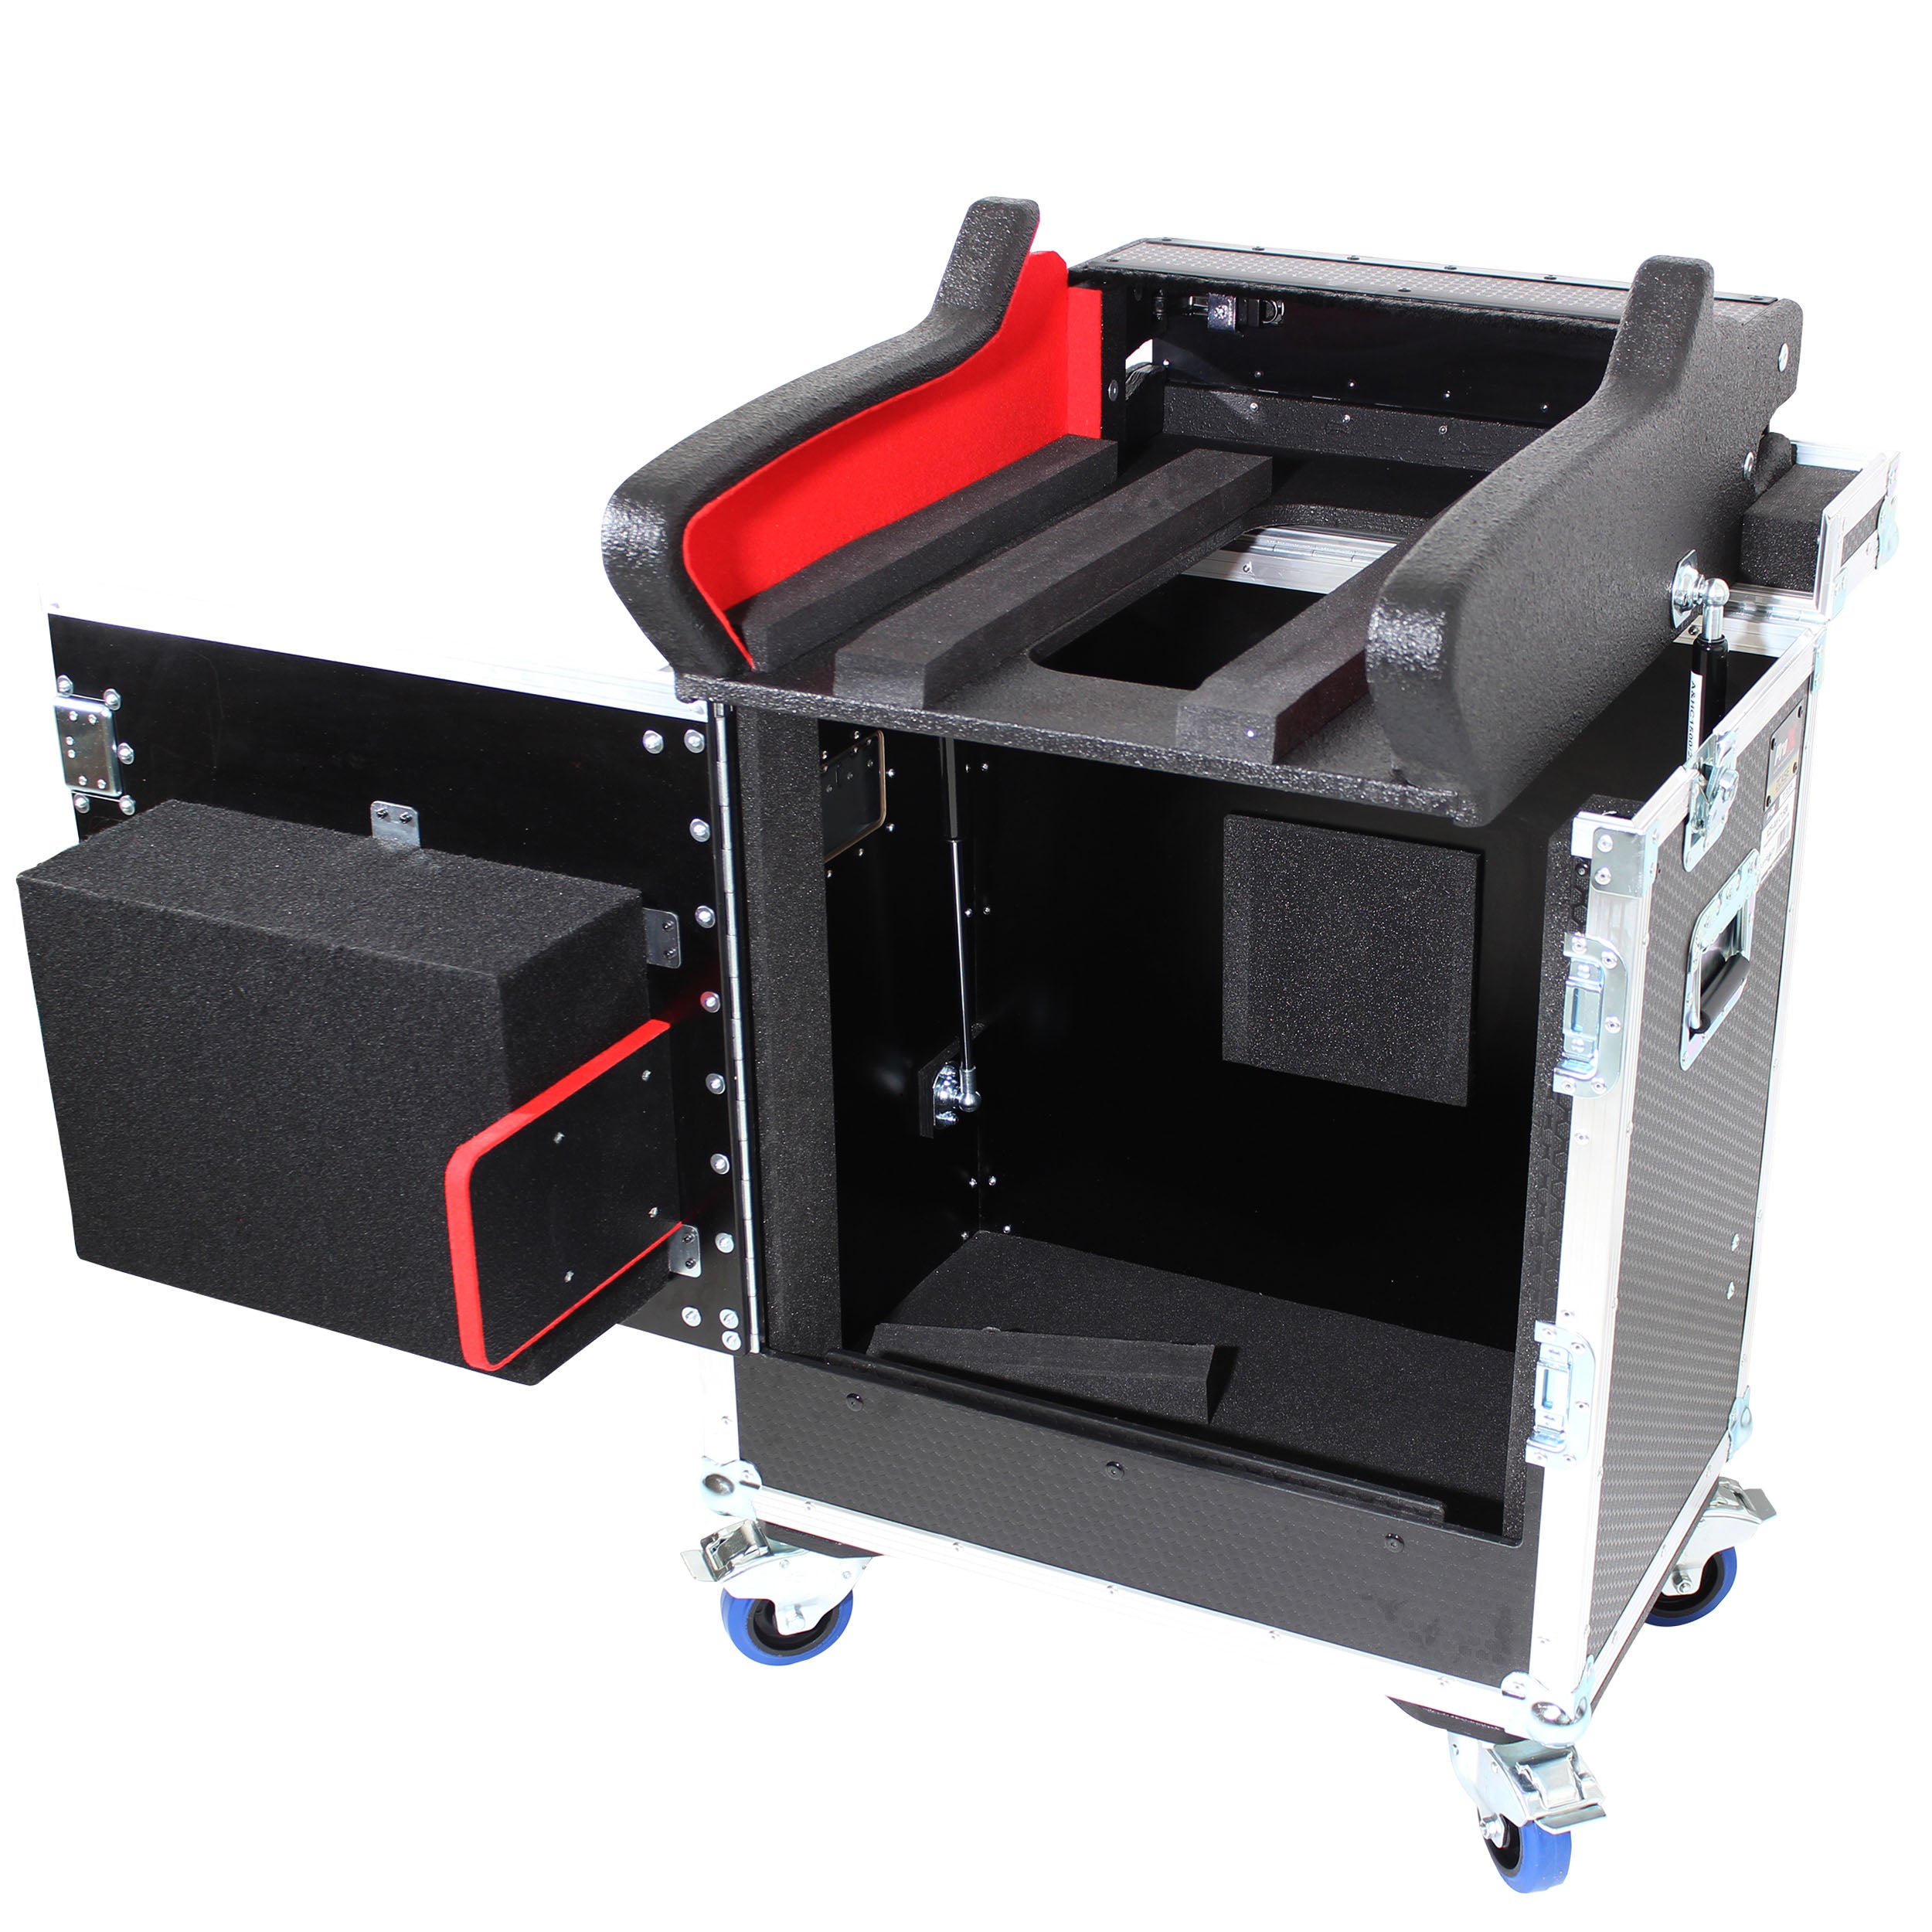 Pro X For Allen and Heath DLive C1500 Flip-Ready Hydraulic Console Easy Retracting Lifting Case by ZCASE XZF-AHC1500